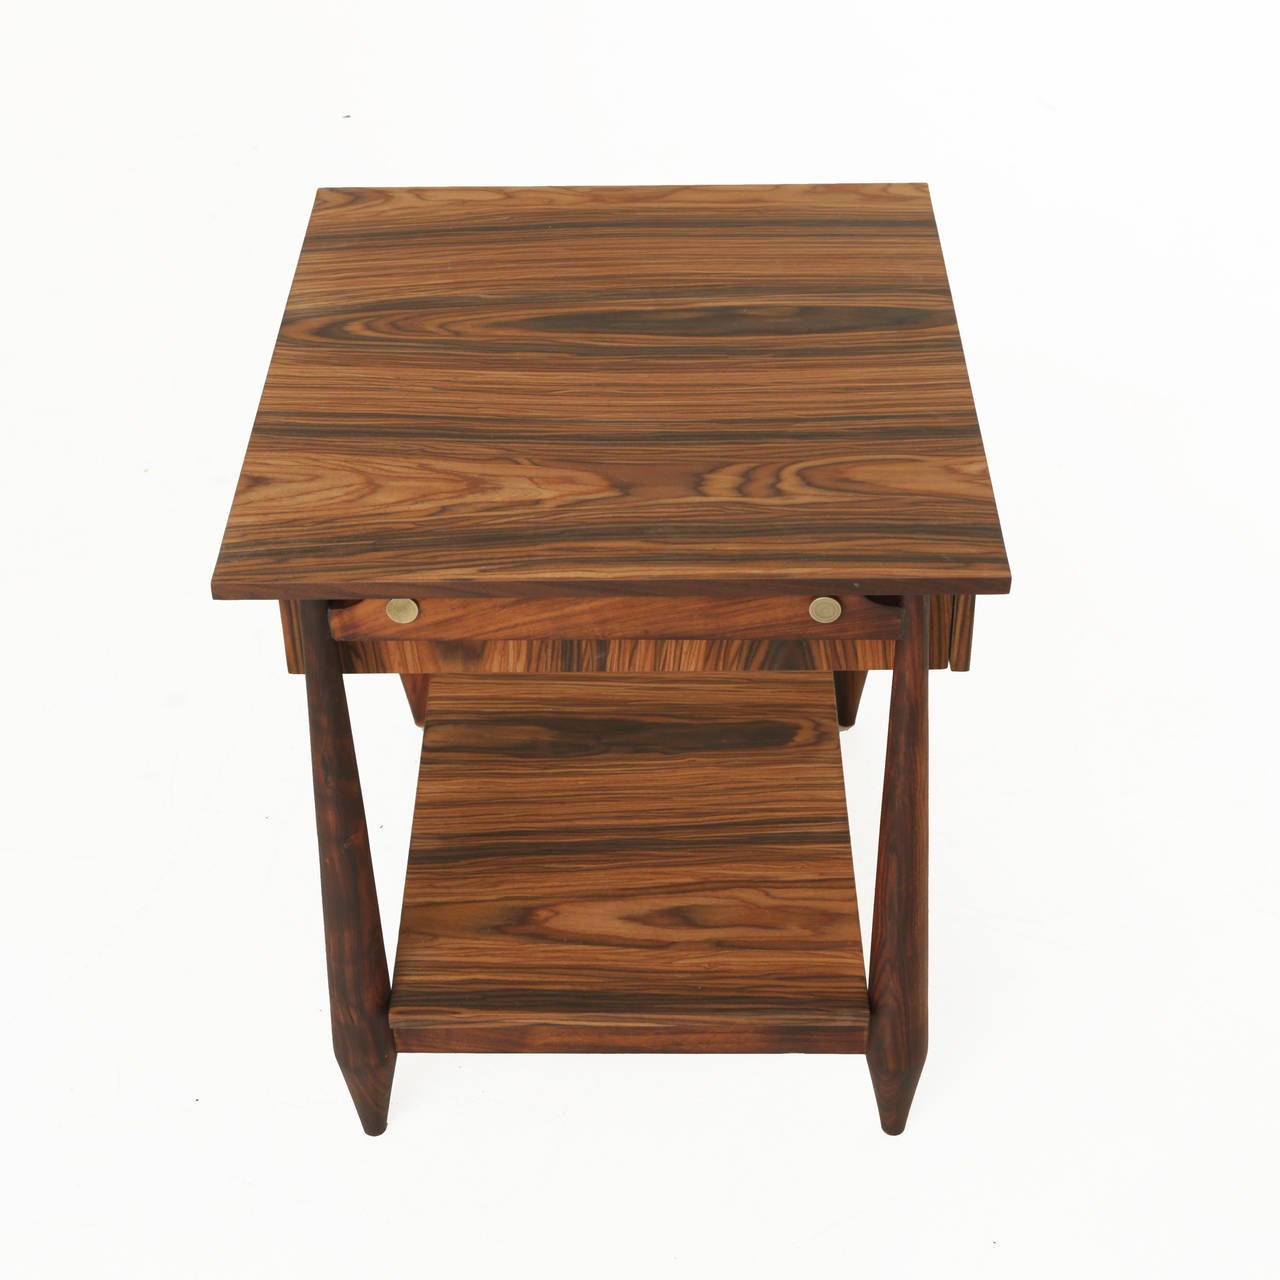 Contemporary Floating Rosewood End Table with Sculptural Legs by Thomas Hayes Studio